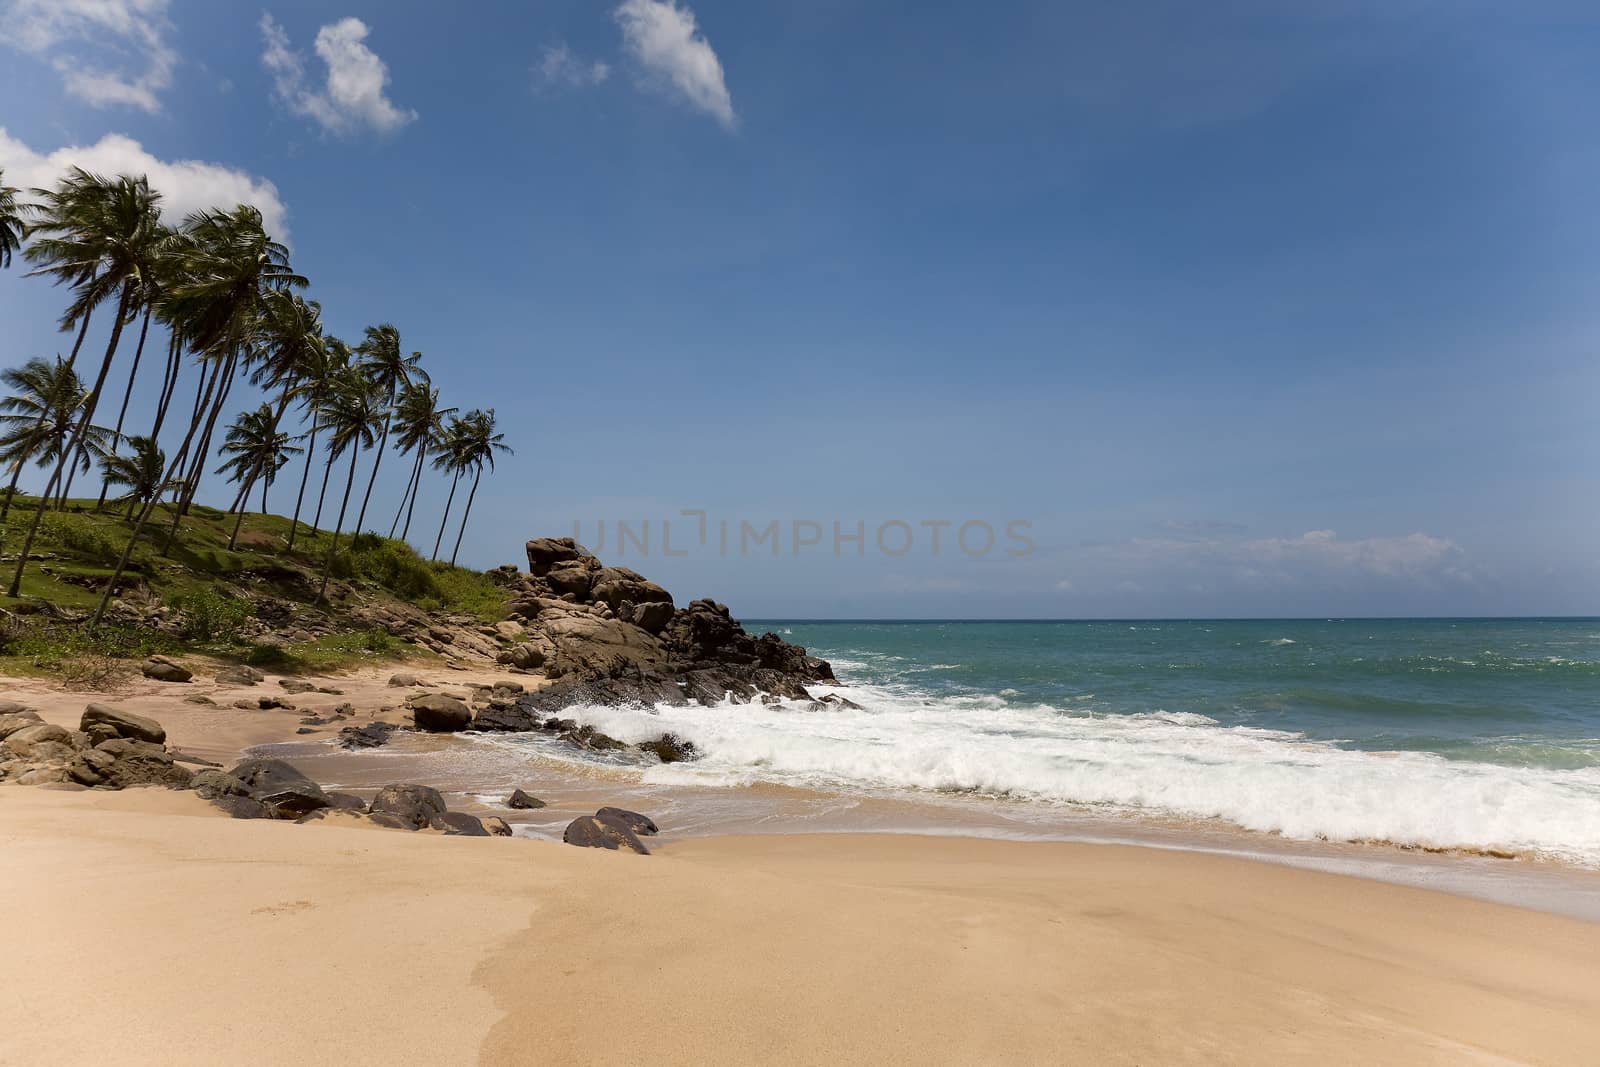  Tropical paradise with trees on beach against blue sky with clo by foryouinf